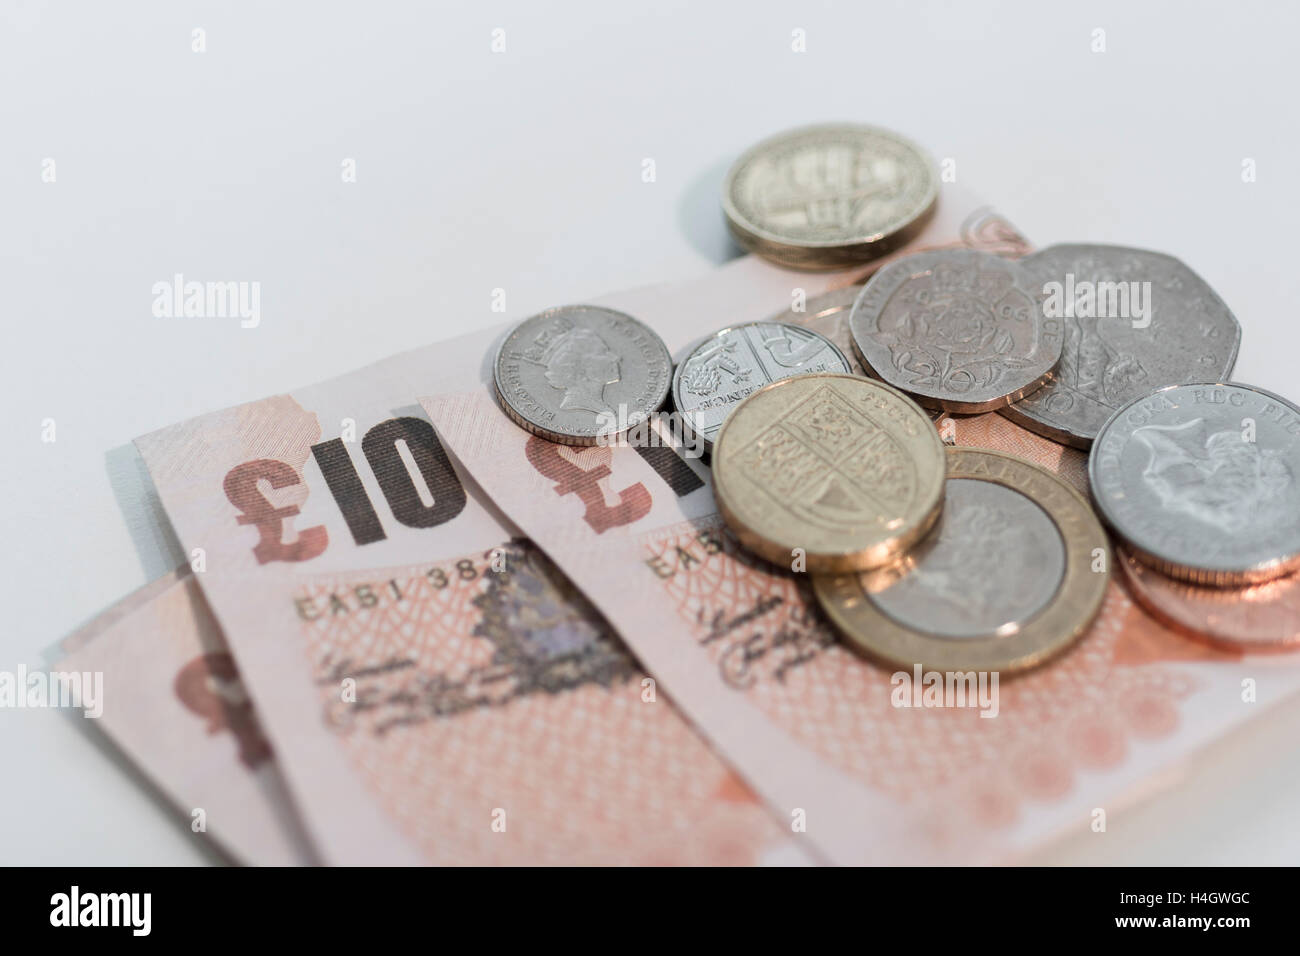 Picture of UK £10 notes and loose change - metaphor for concept of cost of living, wages and pay, spending power, and savings. Stock Photo